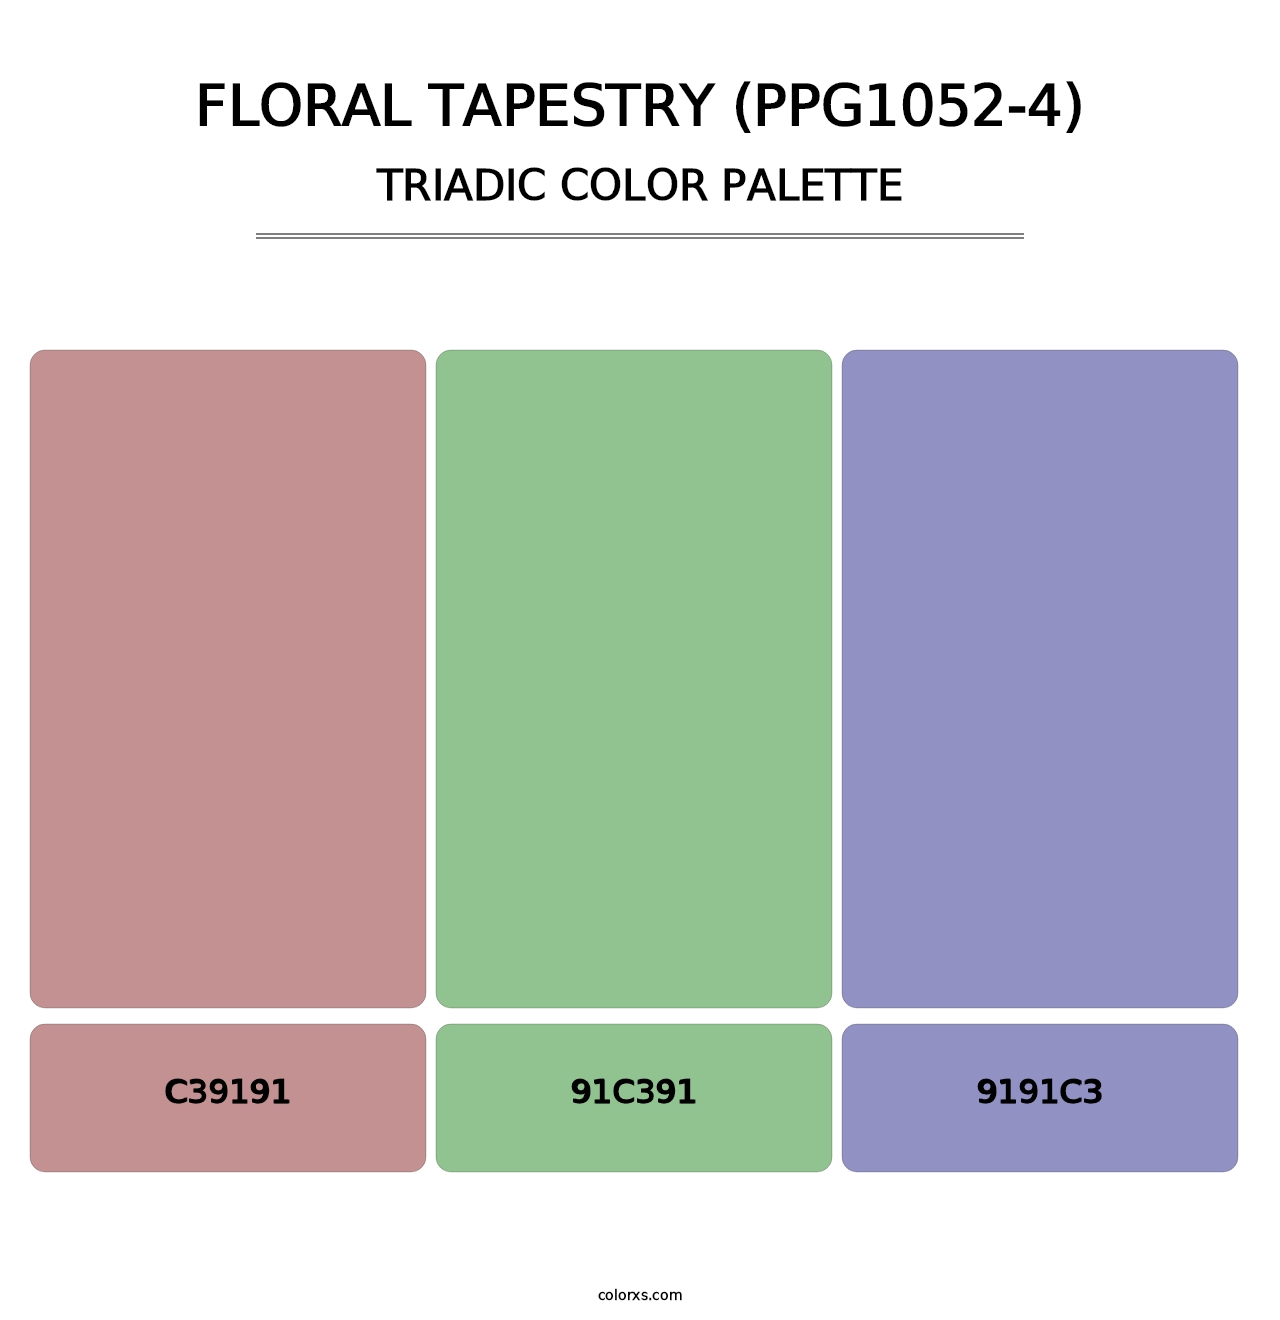 Floral Tapestry (PPG1052-4) - Triadic Color Palette